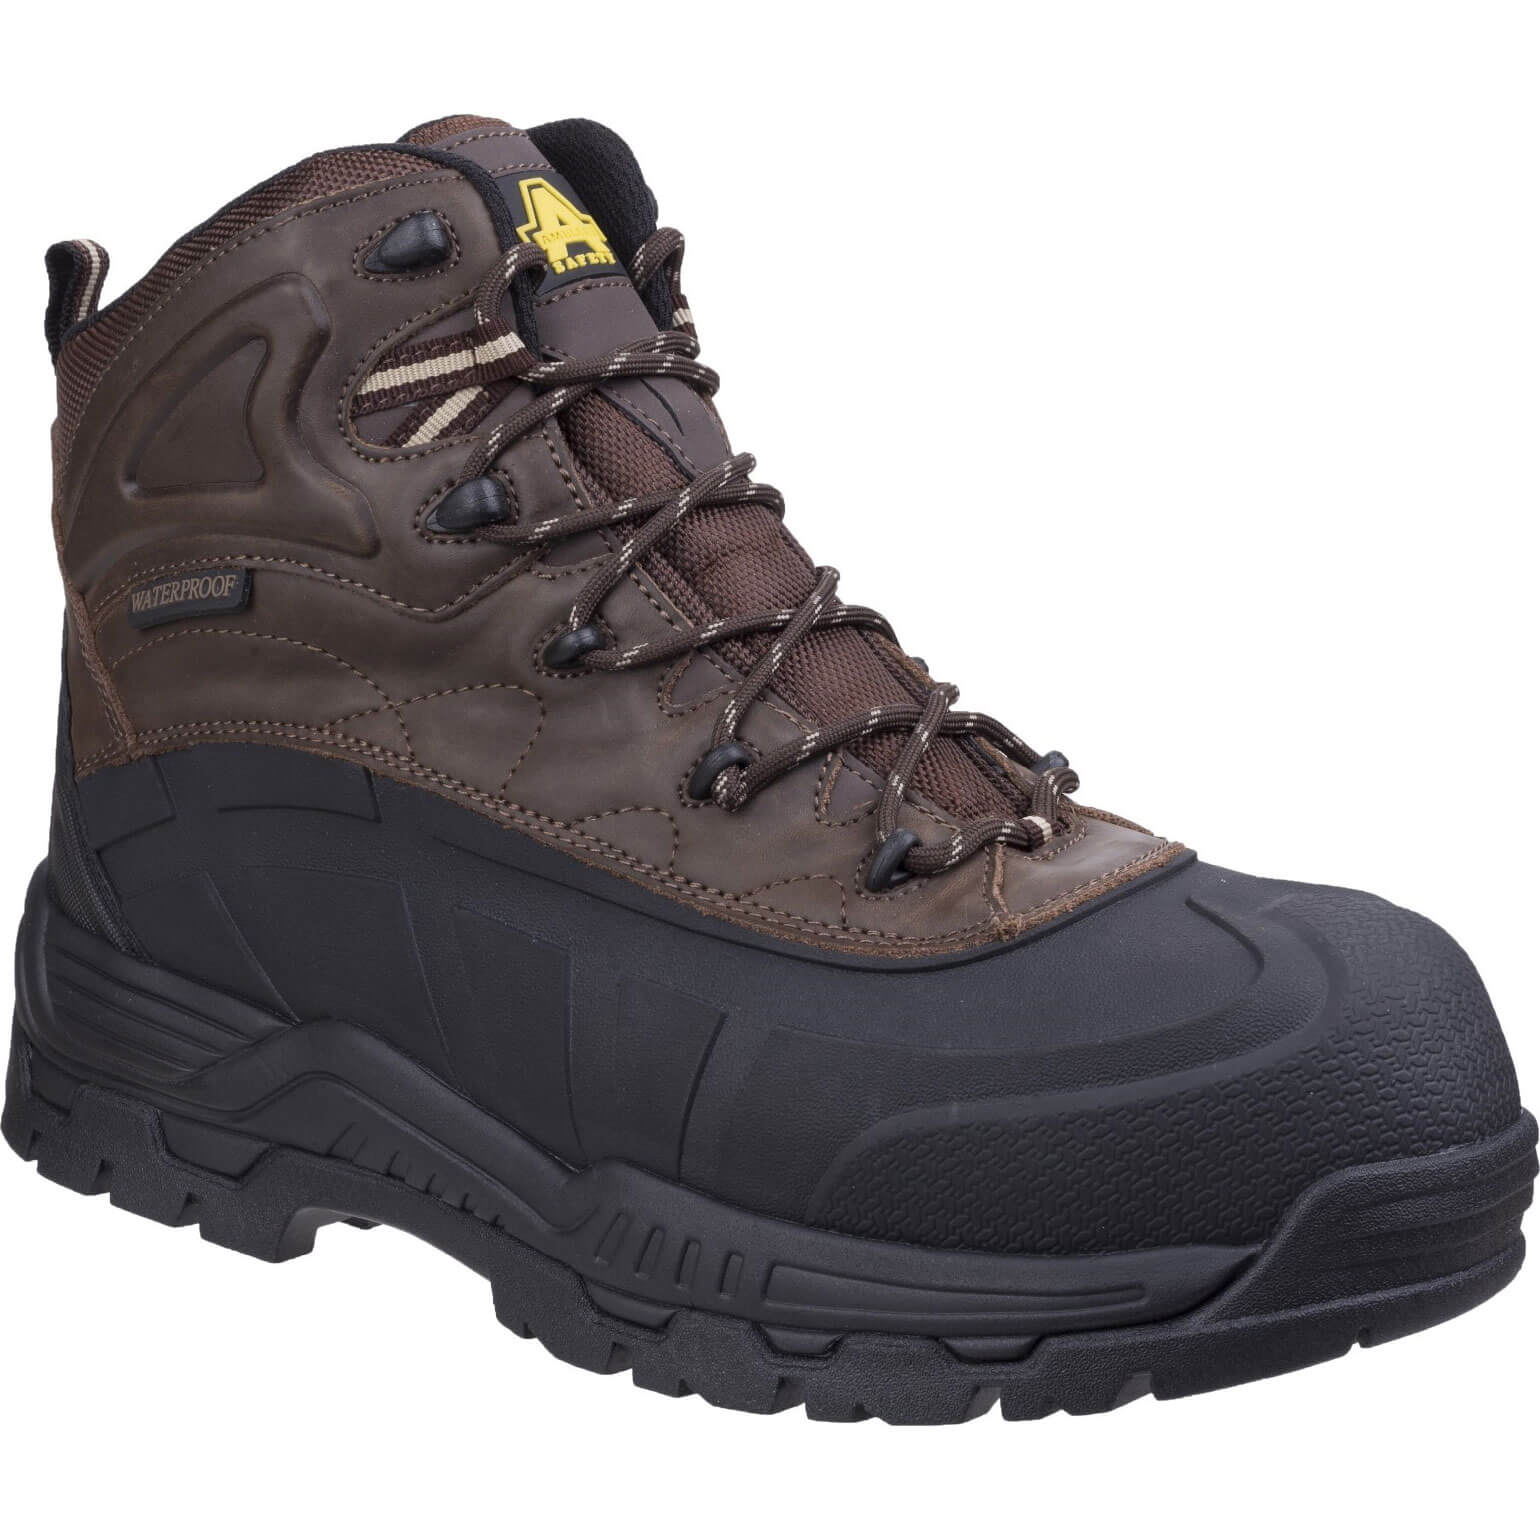 Image of Amblers Safety FS430 Orca Safety Boot Brown Size 10.5